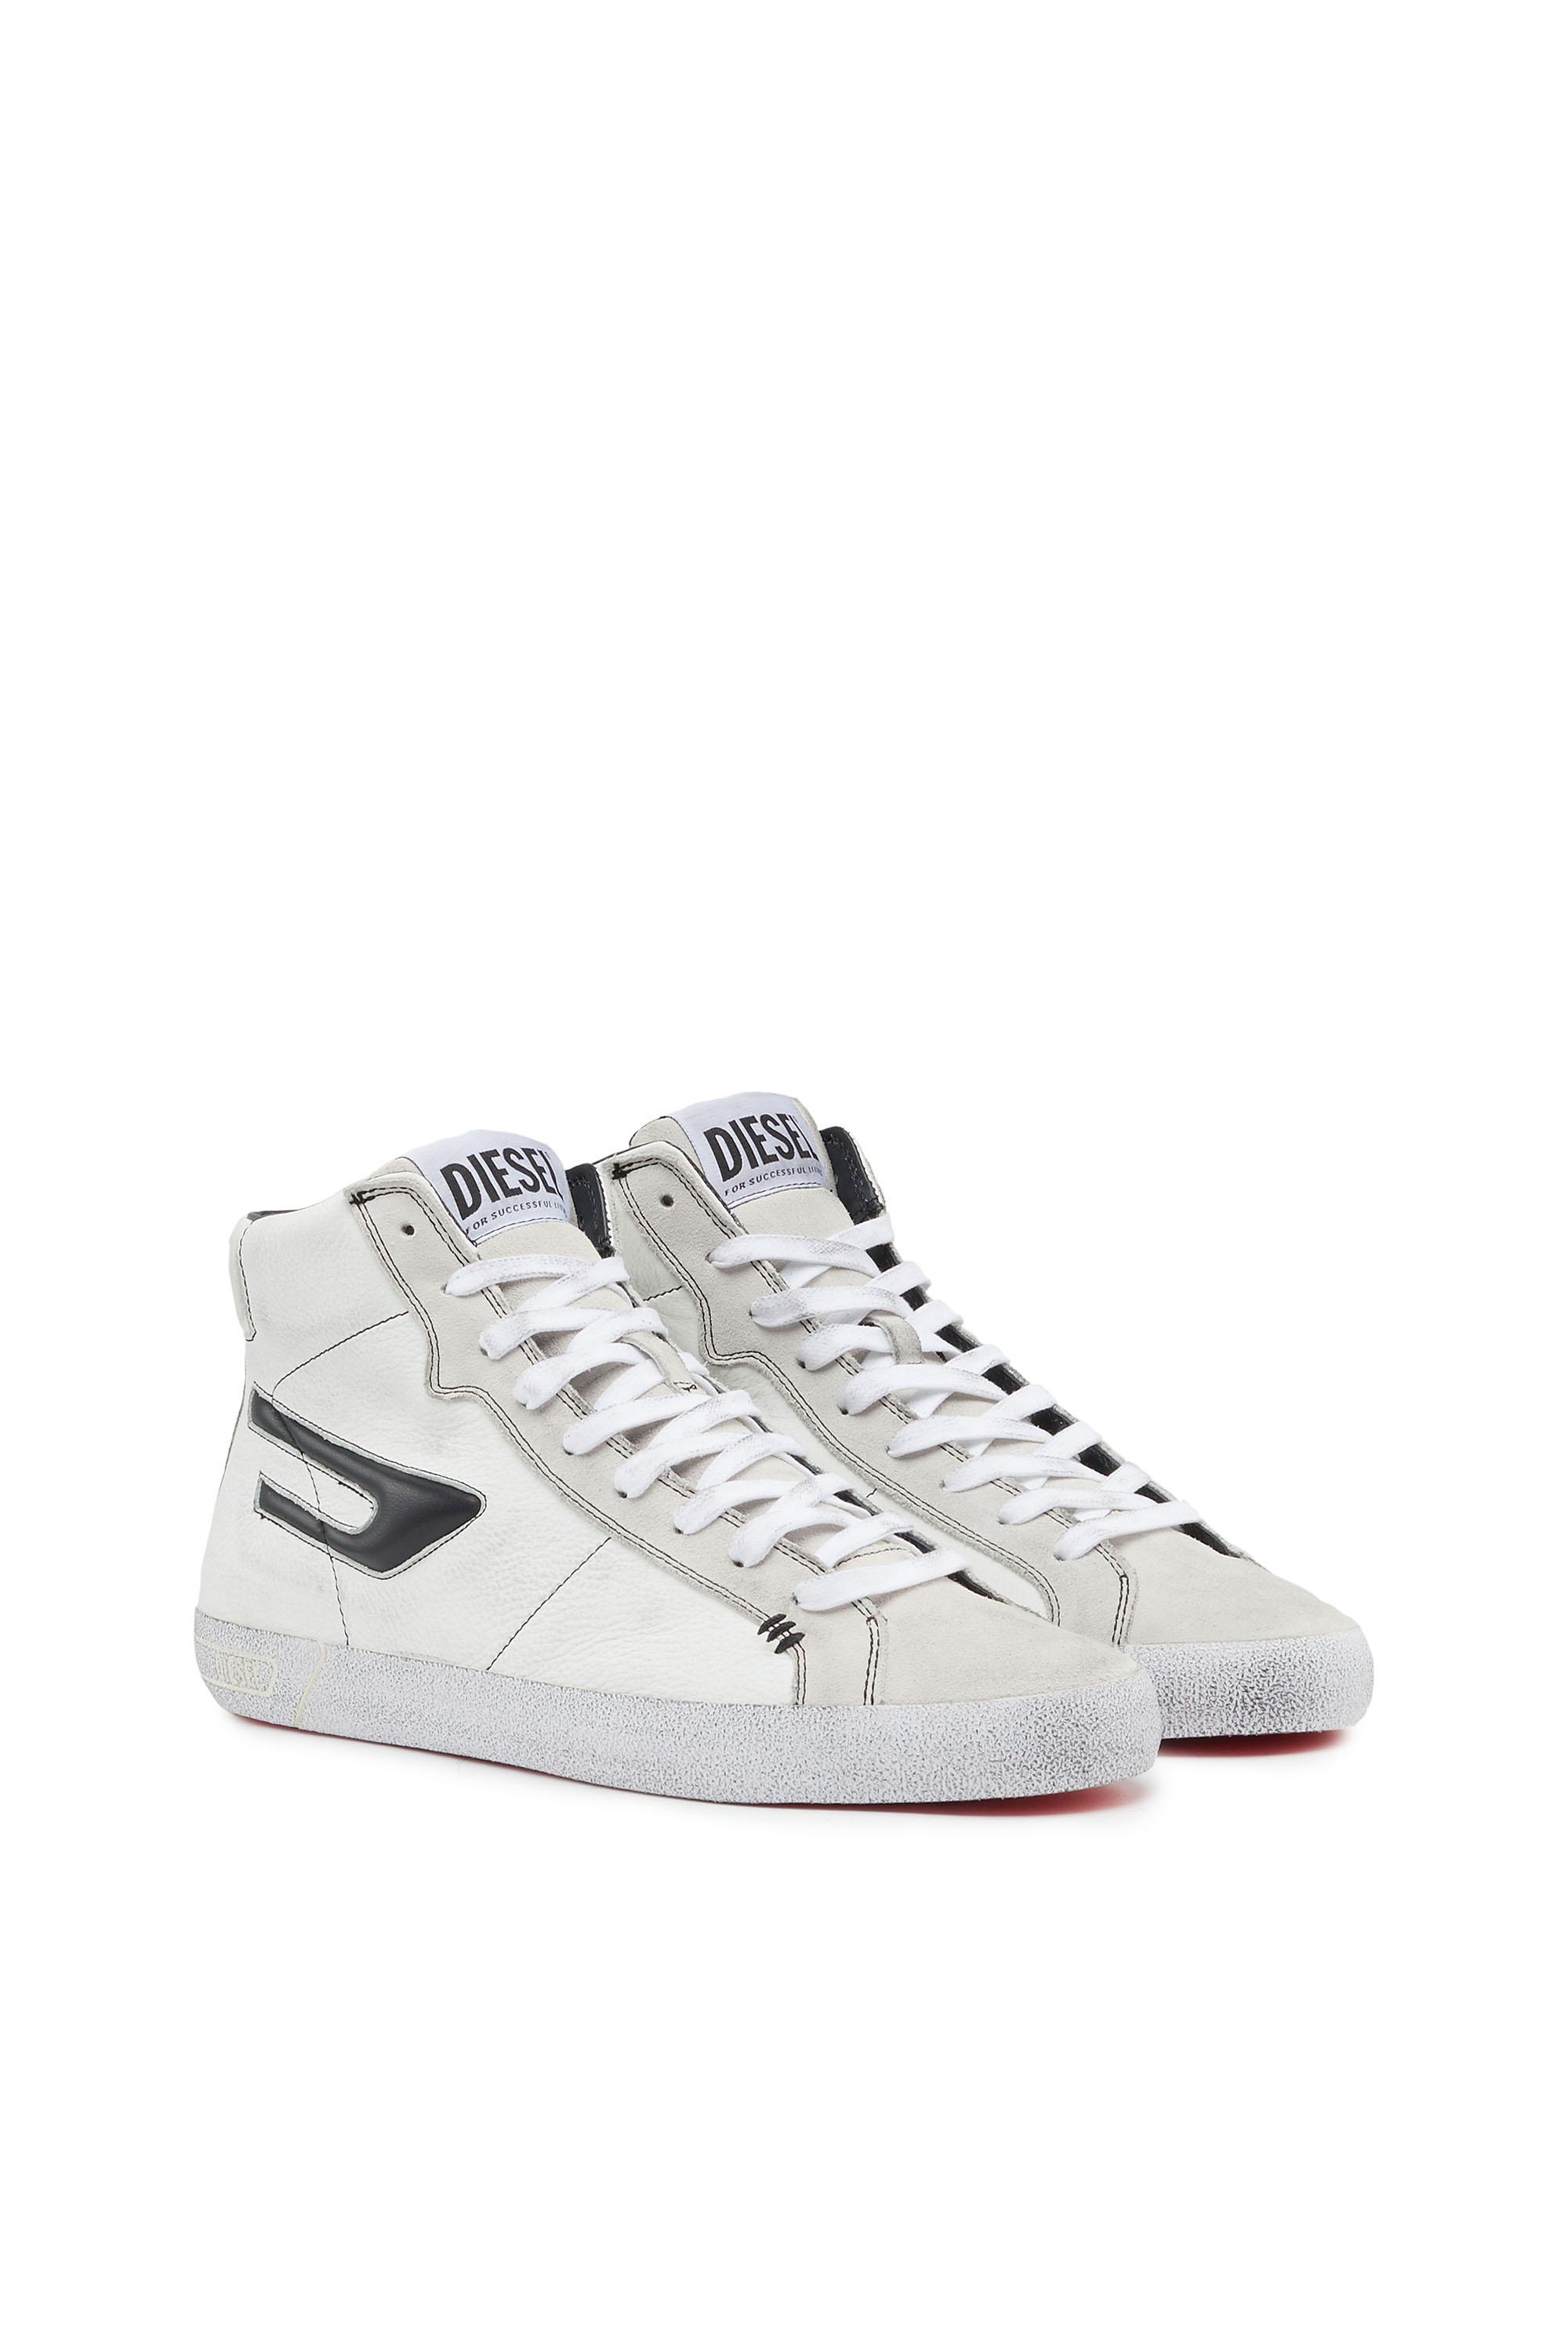 Diesel - S-LEROJI MID, Man S-Leroji Mid - High-top leather sneakers with D logo in White - Image 2